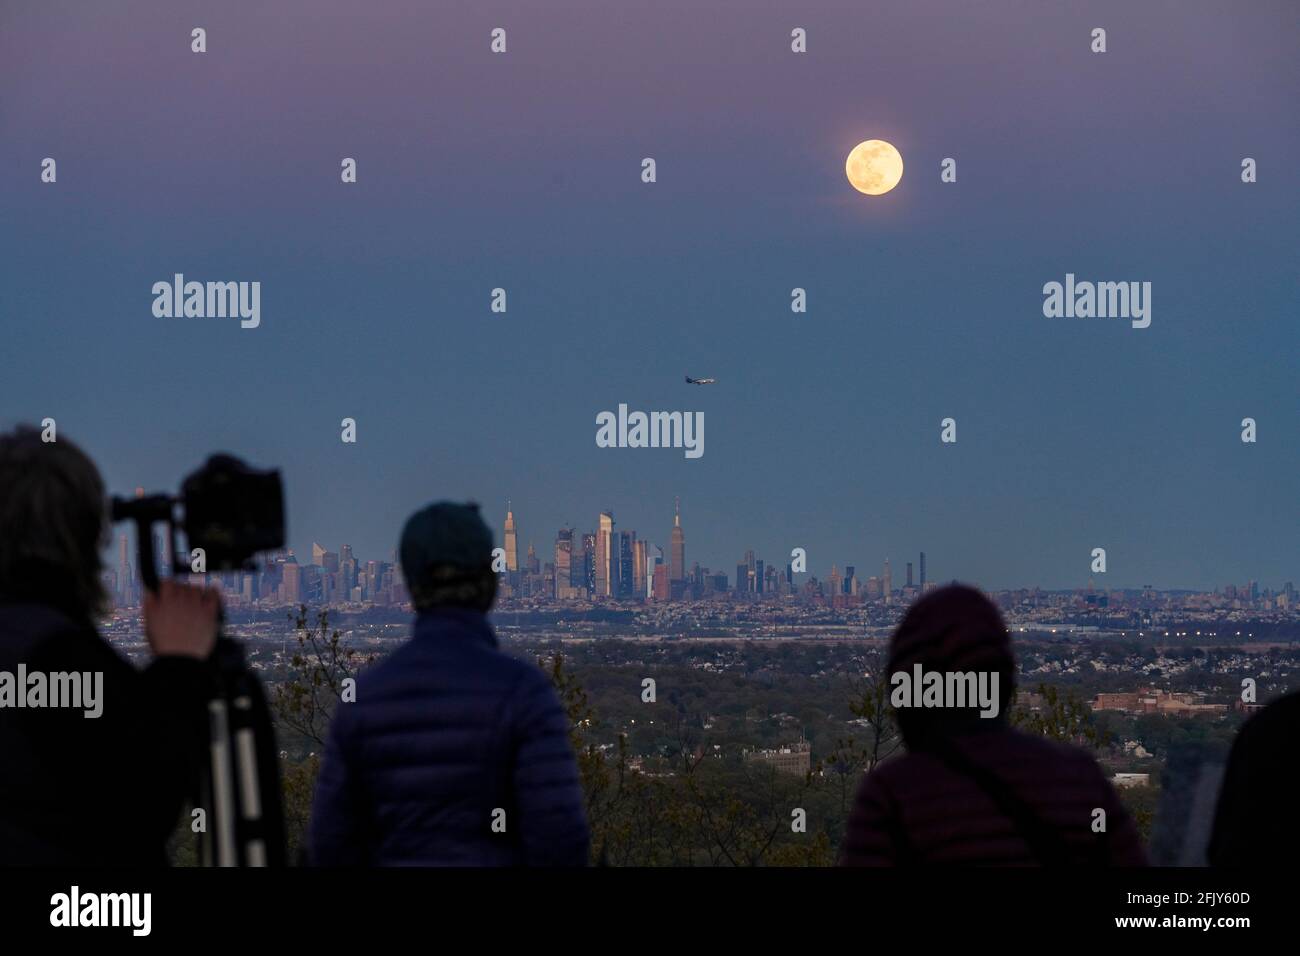 New York, USA. 26th Apr, 2021. People watch a super moon over New York's Manhattan skyline from West Orange of New Jersey, the United States, on April 26, 2021. Credit: Wang Ying/Xinhua/Alamy Live News Stock Photo